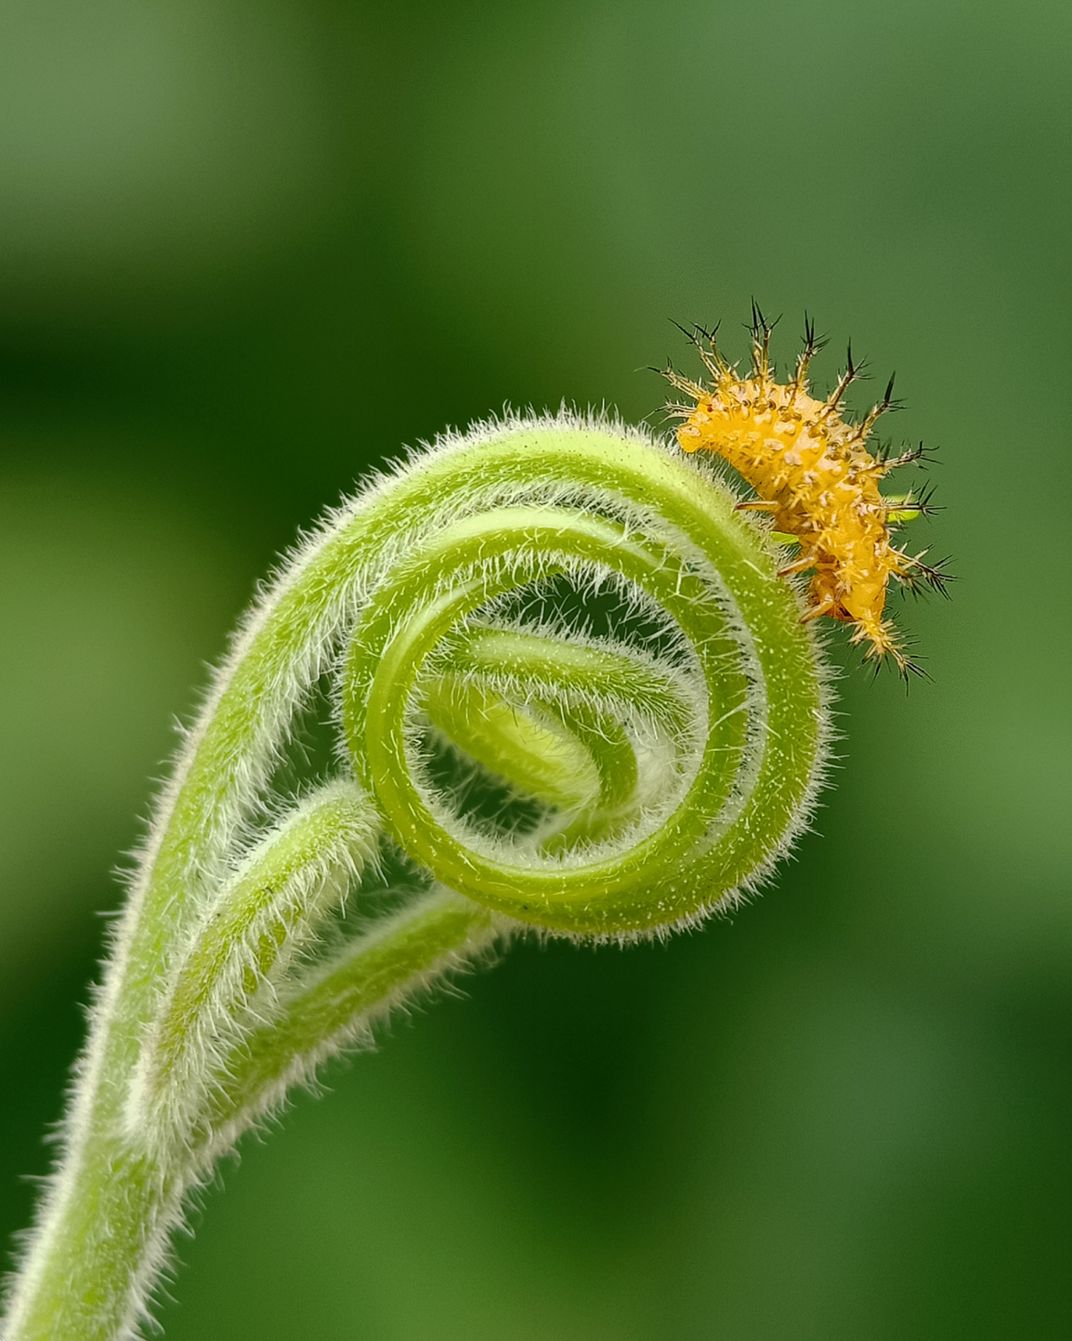 13 - A ladybug larva perches on the edge of the tendril of a pumpkin plant and feeds on its leaves.